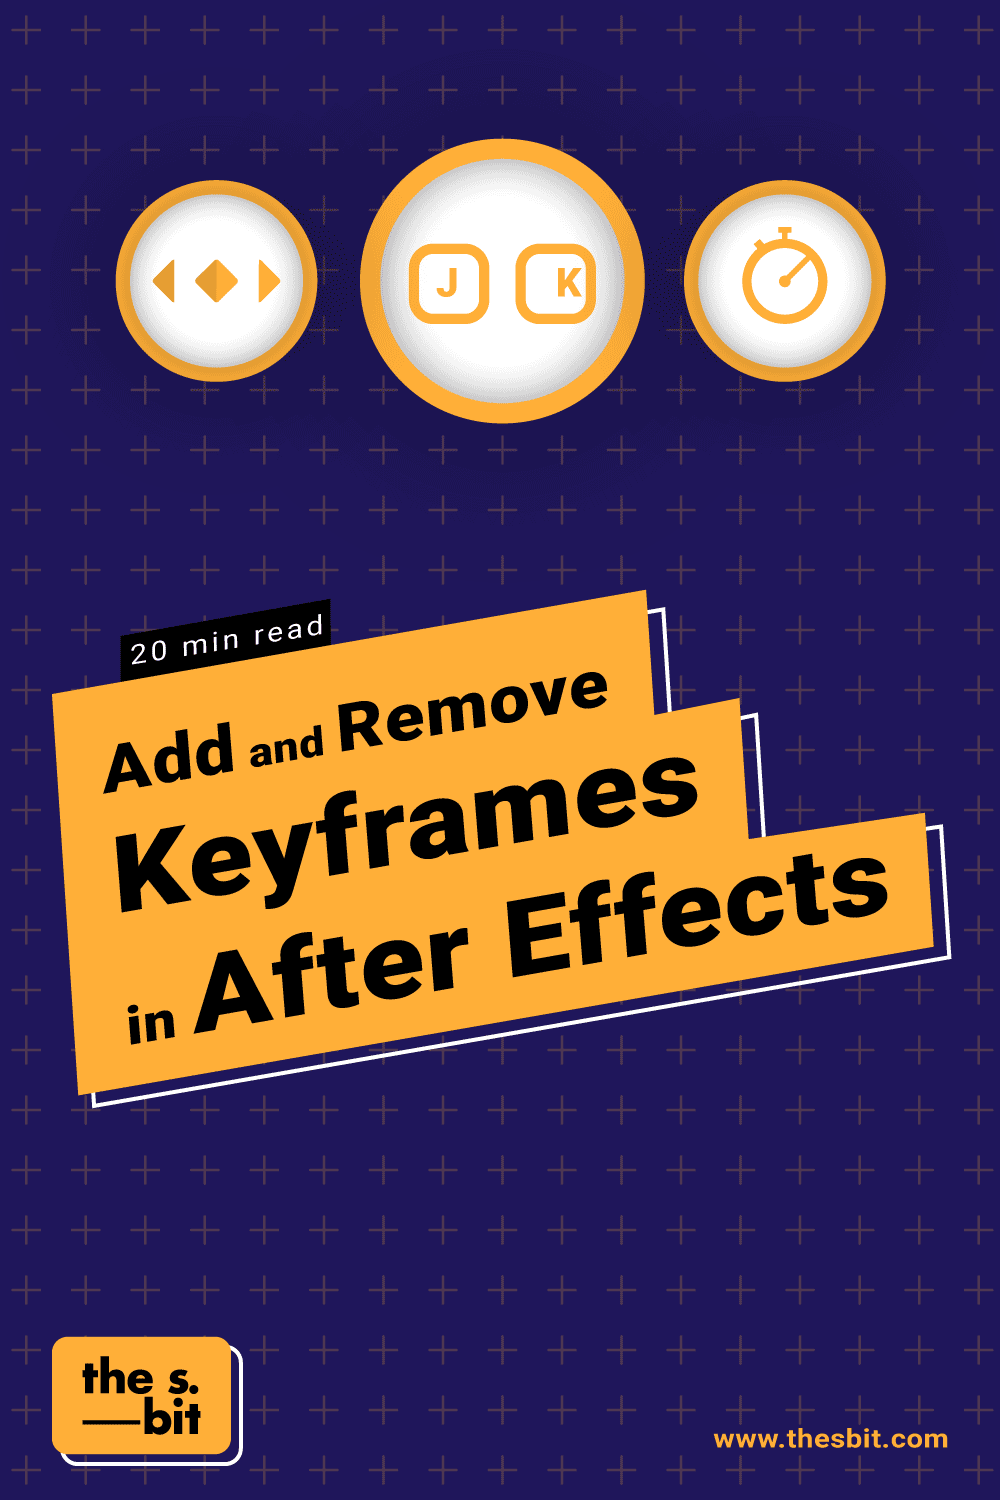 Add-and-remove-keyframes-in-After-effects-Pinterest-Cover